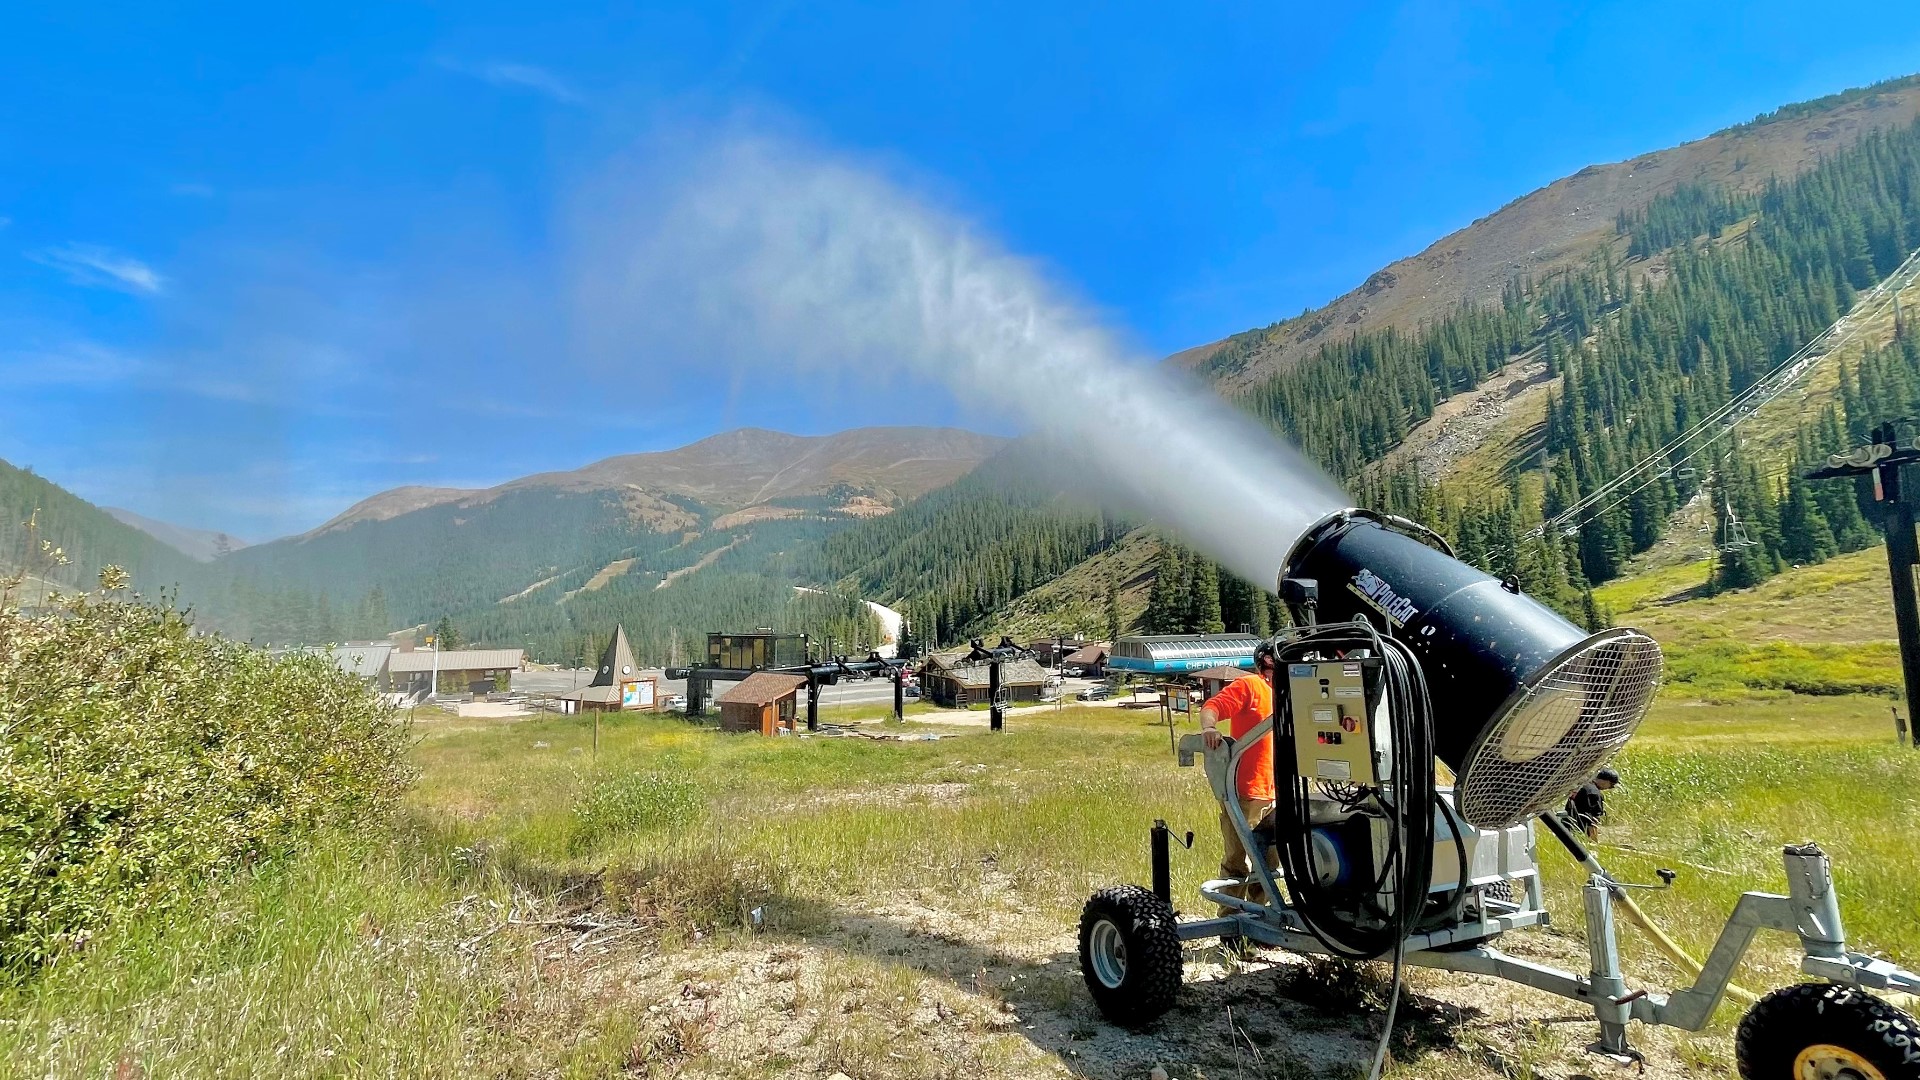 Loveland Ski Area unleashed its snowguns for testing on Wednesday, Sept. 8, 2021. The Colorado ski area hopes to begin snowmaking in 3 weeks.